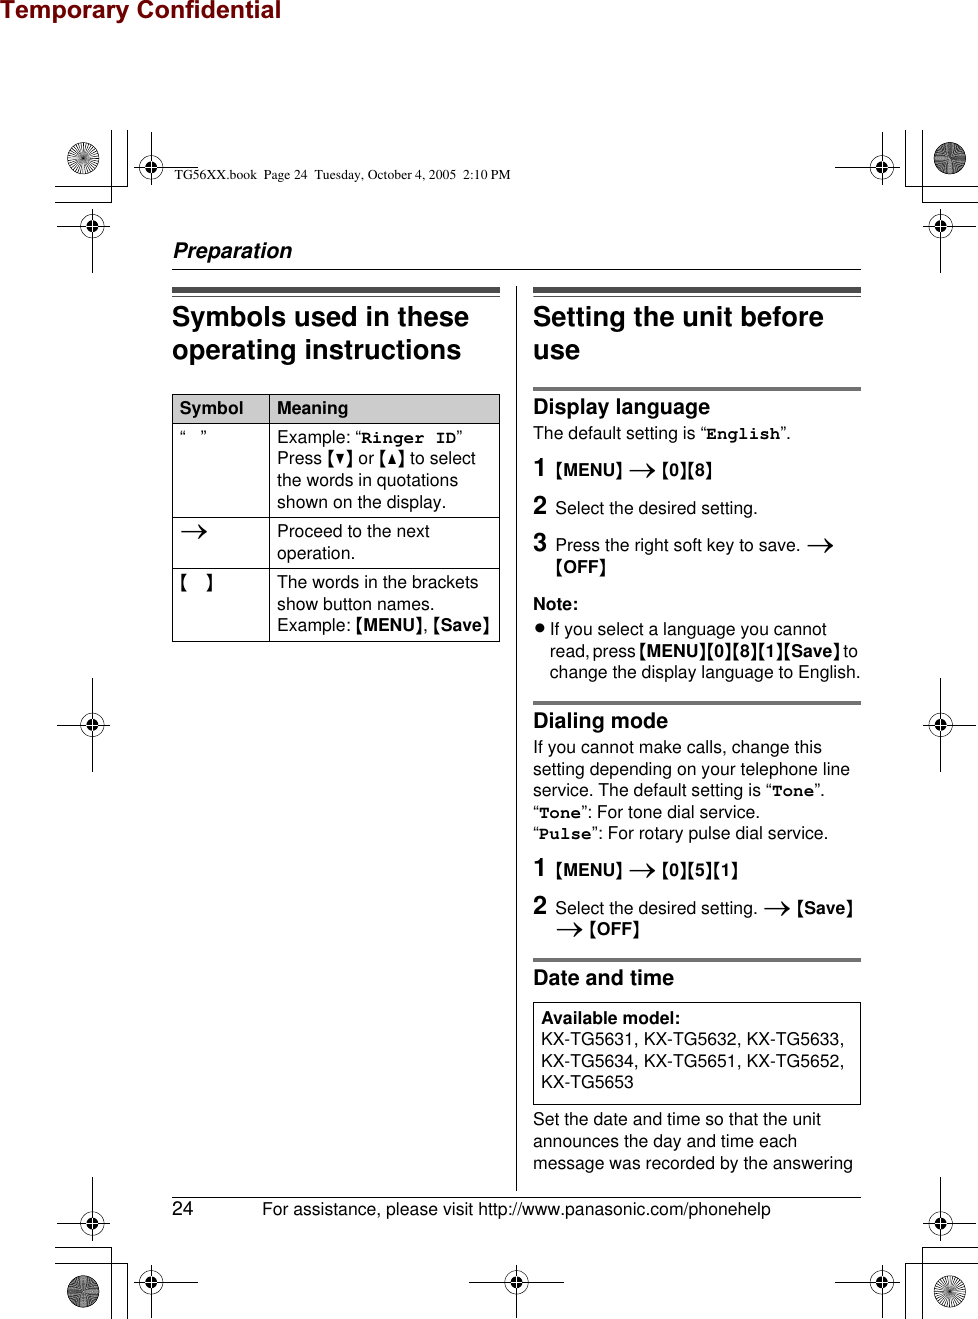 Temporary ConfidentialPreparation24 For assistance, please visit http://www.panasonic.com/phonehelpSymbols used in these operating instructions Setting the unit before useDisplay languageThe default setting is “English”.1{MENU} i {0}{8}2Select the desired setting.3Press the right soft key to save. i {OFF}Note:LIf you select a language you cannot read, press {MENU}{0}{8}{1}{Save} to change the display language to English.Dialing modeIf you cannot make calls, change this setting depending on your telephone line service. The default setting is “Tone”.“Tone”: For tone dial service.“Pulse”: For rotary pulse dial service.1{MENU} i {0}{5}{1}2Select the desired setting. i {Save} i {OFF}Date and timeSet the date and time so that the unit announces the day and time each message was recorded by the answering Symbol Meaning“ ” Example: “Ringer ID”Press {V} or {^} to select the words in quotations shown on the display.iProceed to the next operation.{} The words in the brackets show button names.Example: {MENU}, {Save}Available model:KX-TG5631, KX-TG5632, KX-TG5633, KX-TG5634, KX-TG5651, KX-TG5652, KX-TG5653TG56XX.book  Page 24  Tuesday, October 4, 2005  2:10 PM